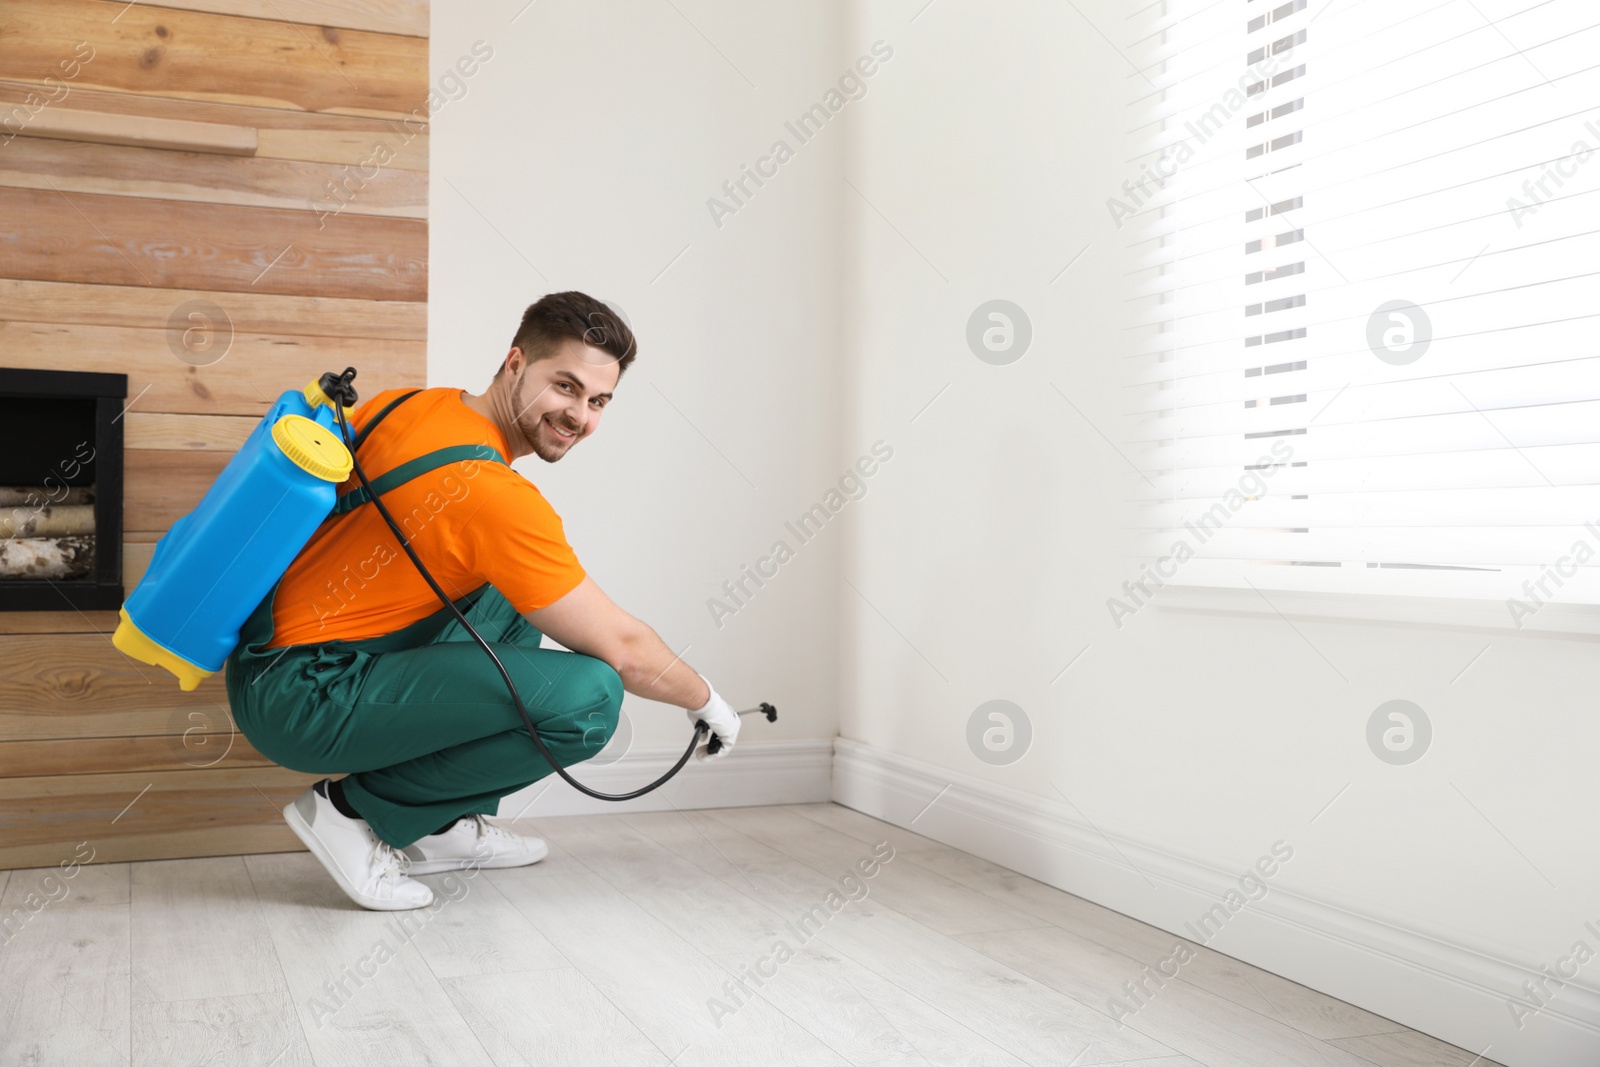 Photo of Pest control worker spraying insecticide on baseboard at home. Space for text